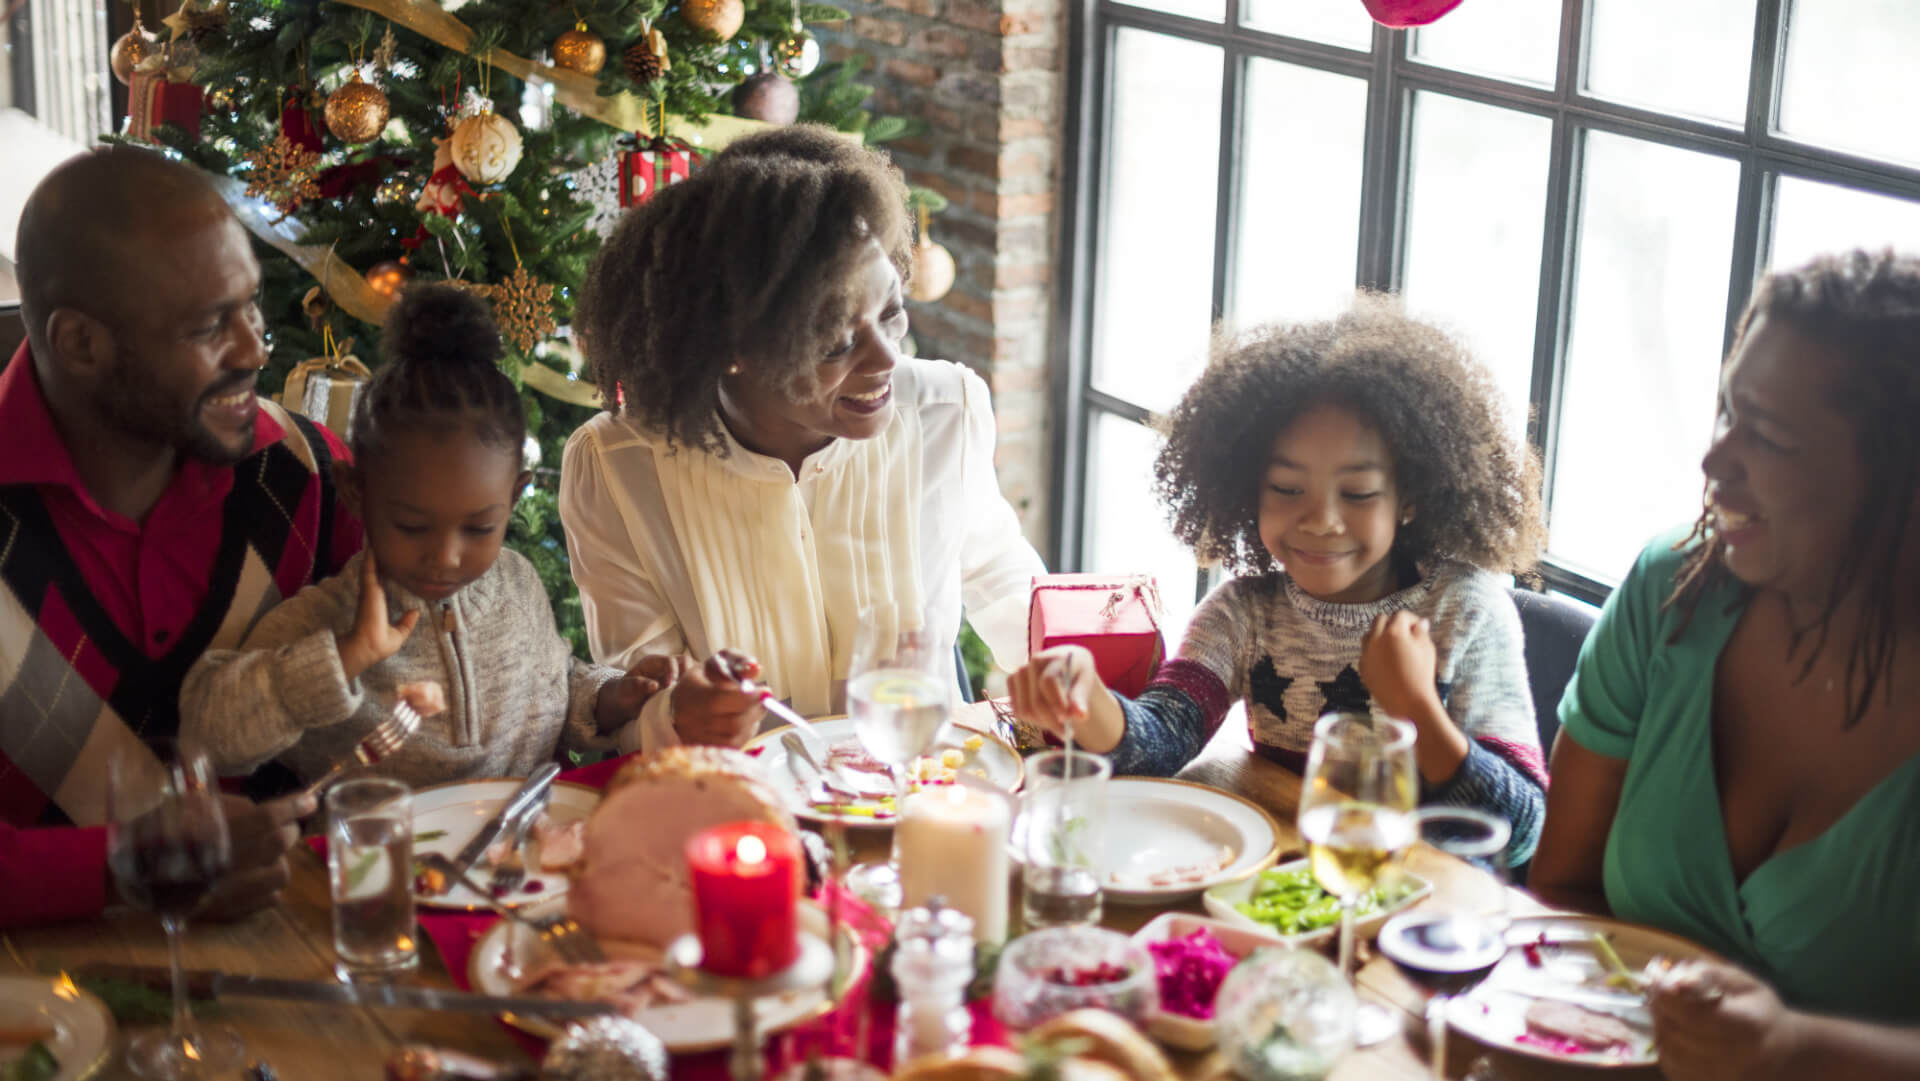 It’s easy to pack on a few extra pounds during the holidays. But by being more mindful and self-aware of those BLTs – bites, licks and tastes – you can avoid the holiday weight gain that plagues most Americans, Atrium Health experts advise. 